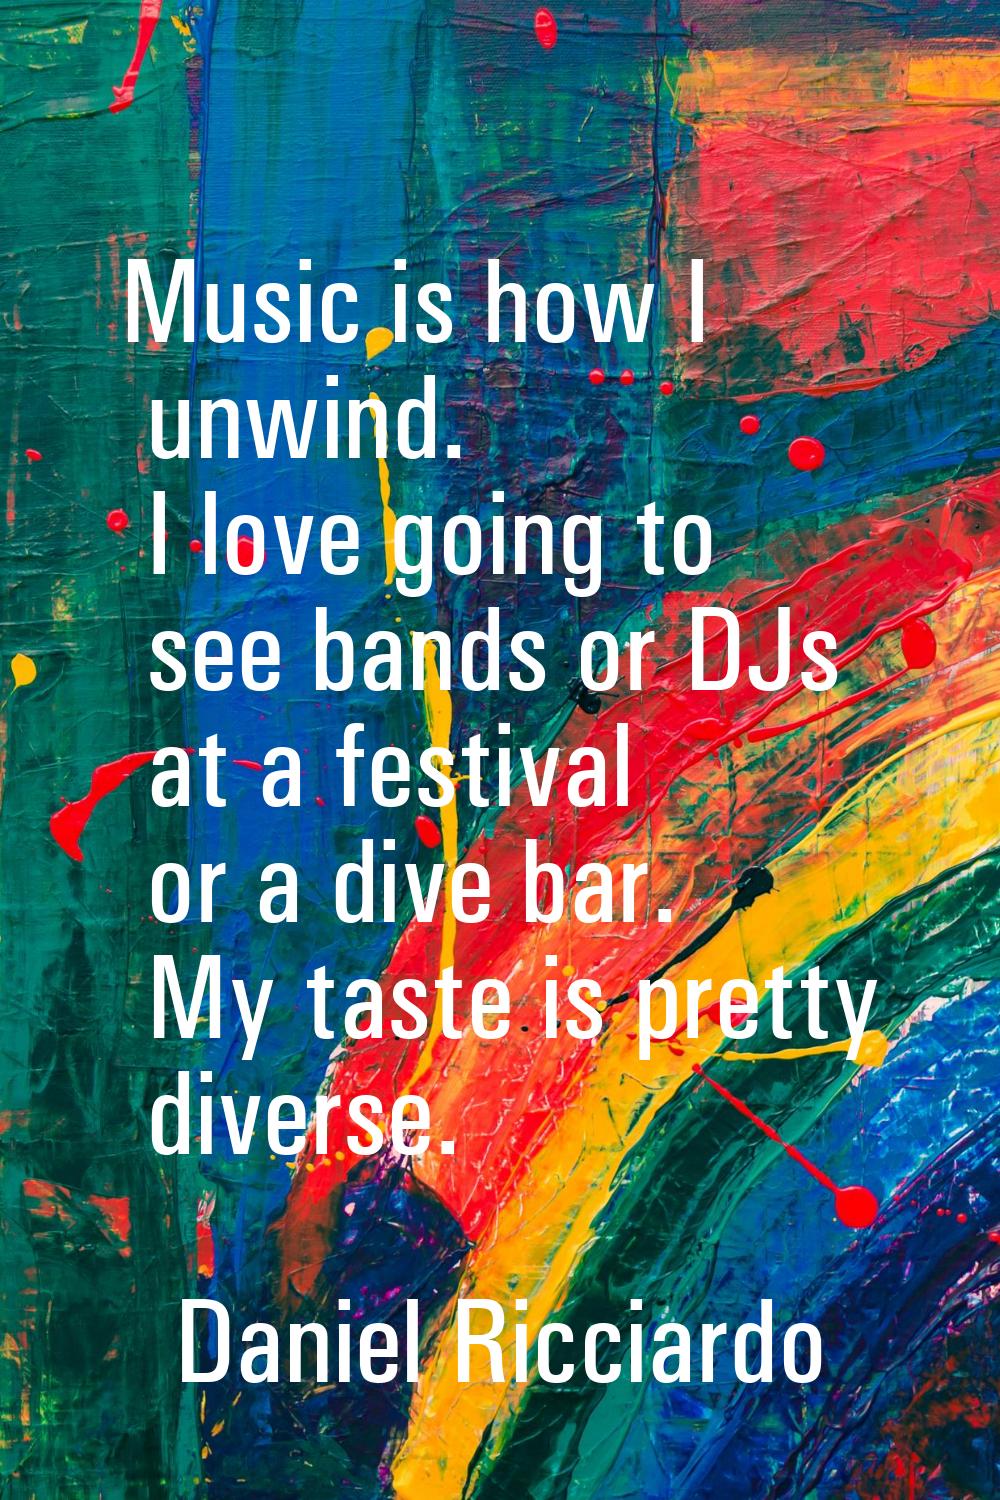 Music is how I unwind. I love going to see bands or DJs at a festival or a dive bar. My taste is pr